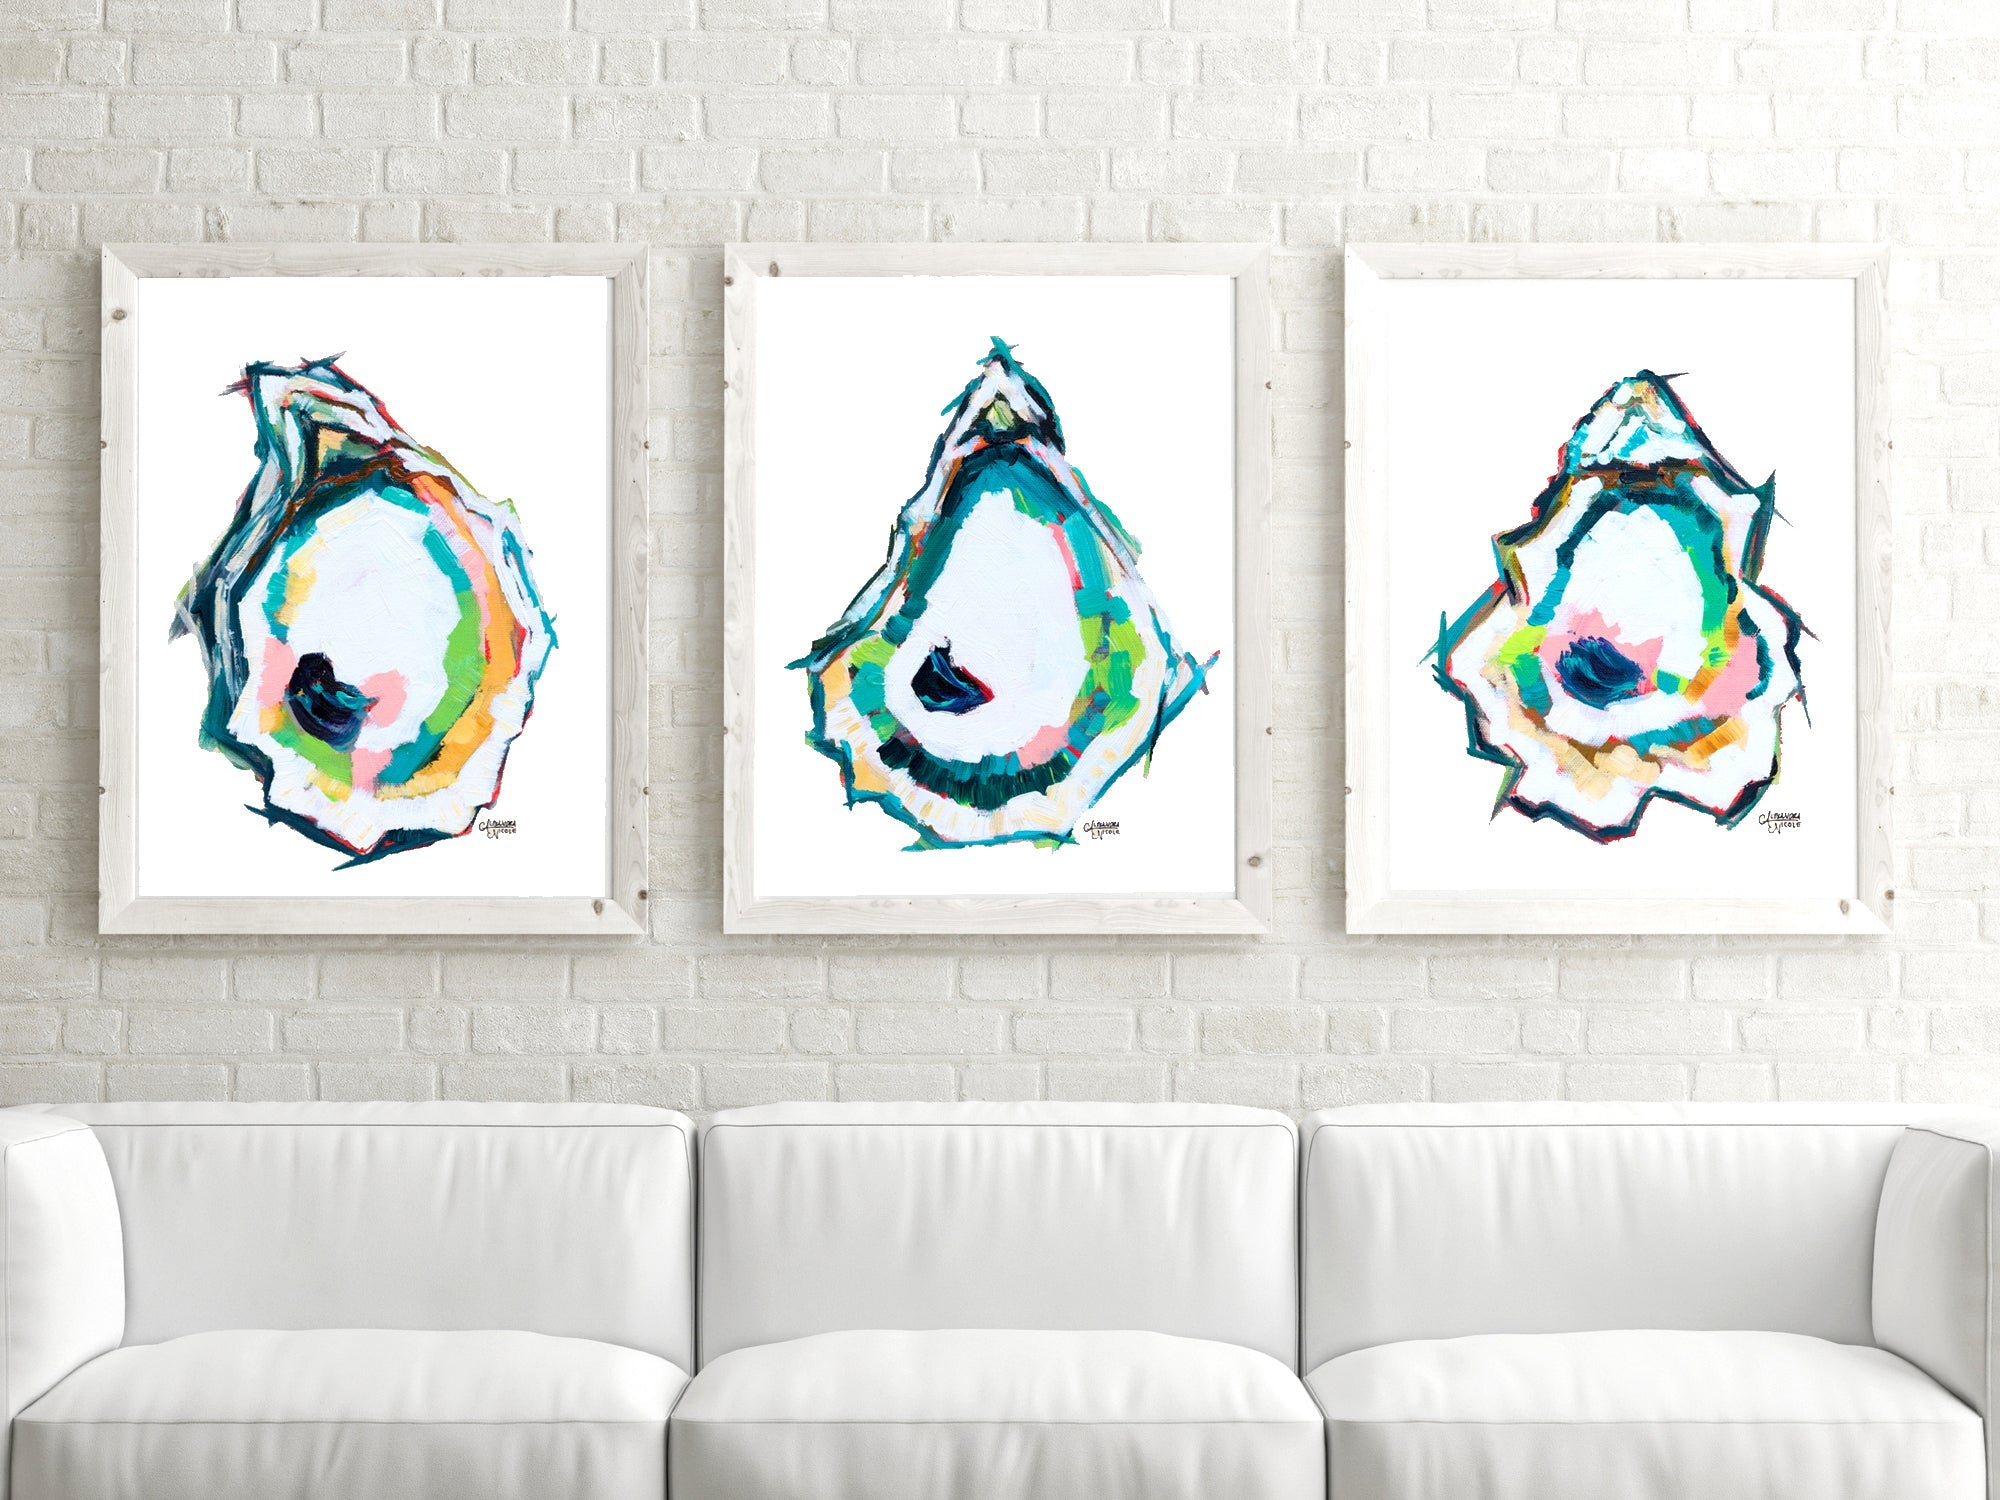 Abstract Oyster Prints Discount Set of 3 - ArtByAlexandraNicole